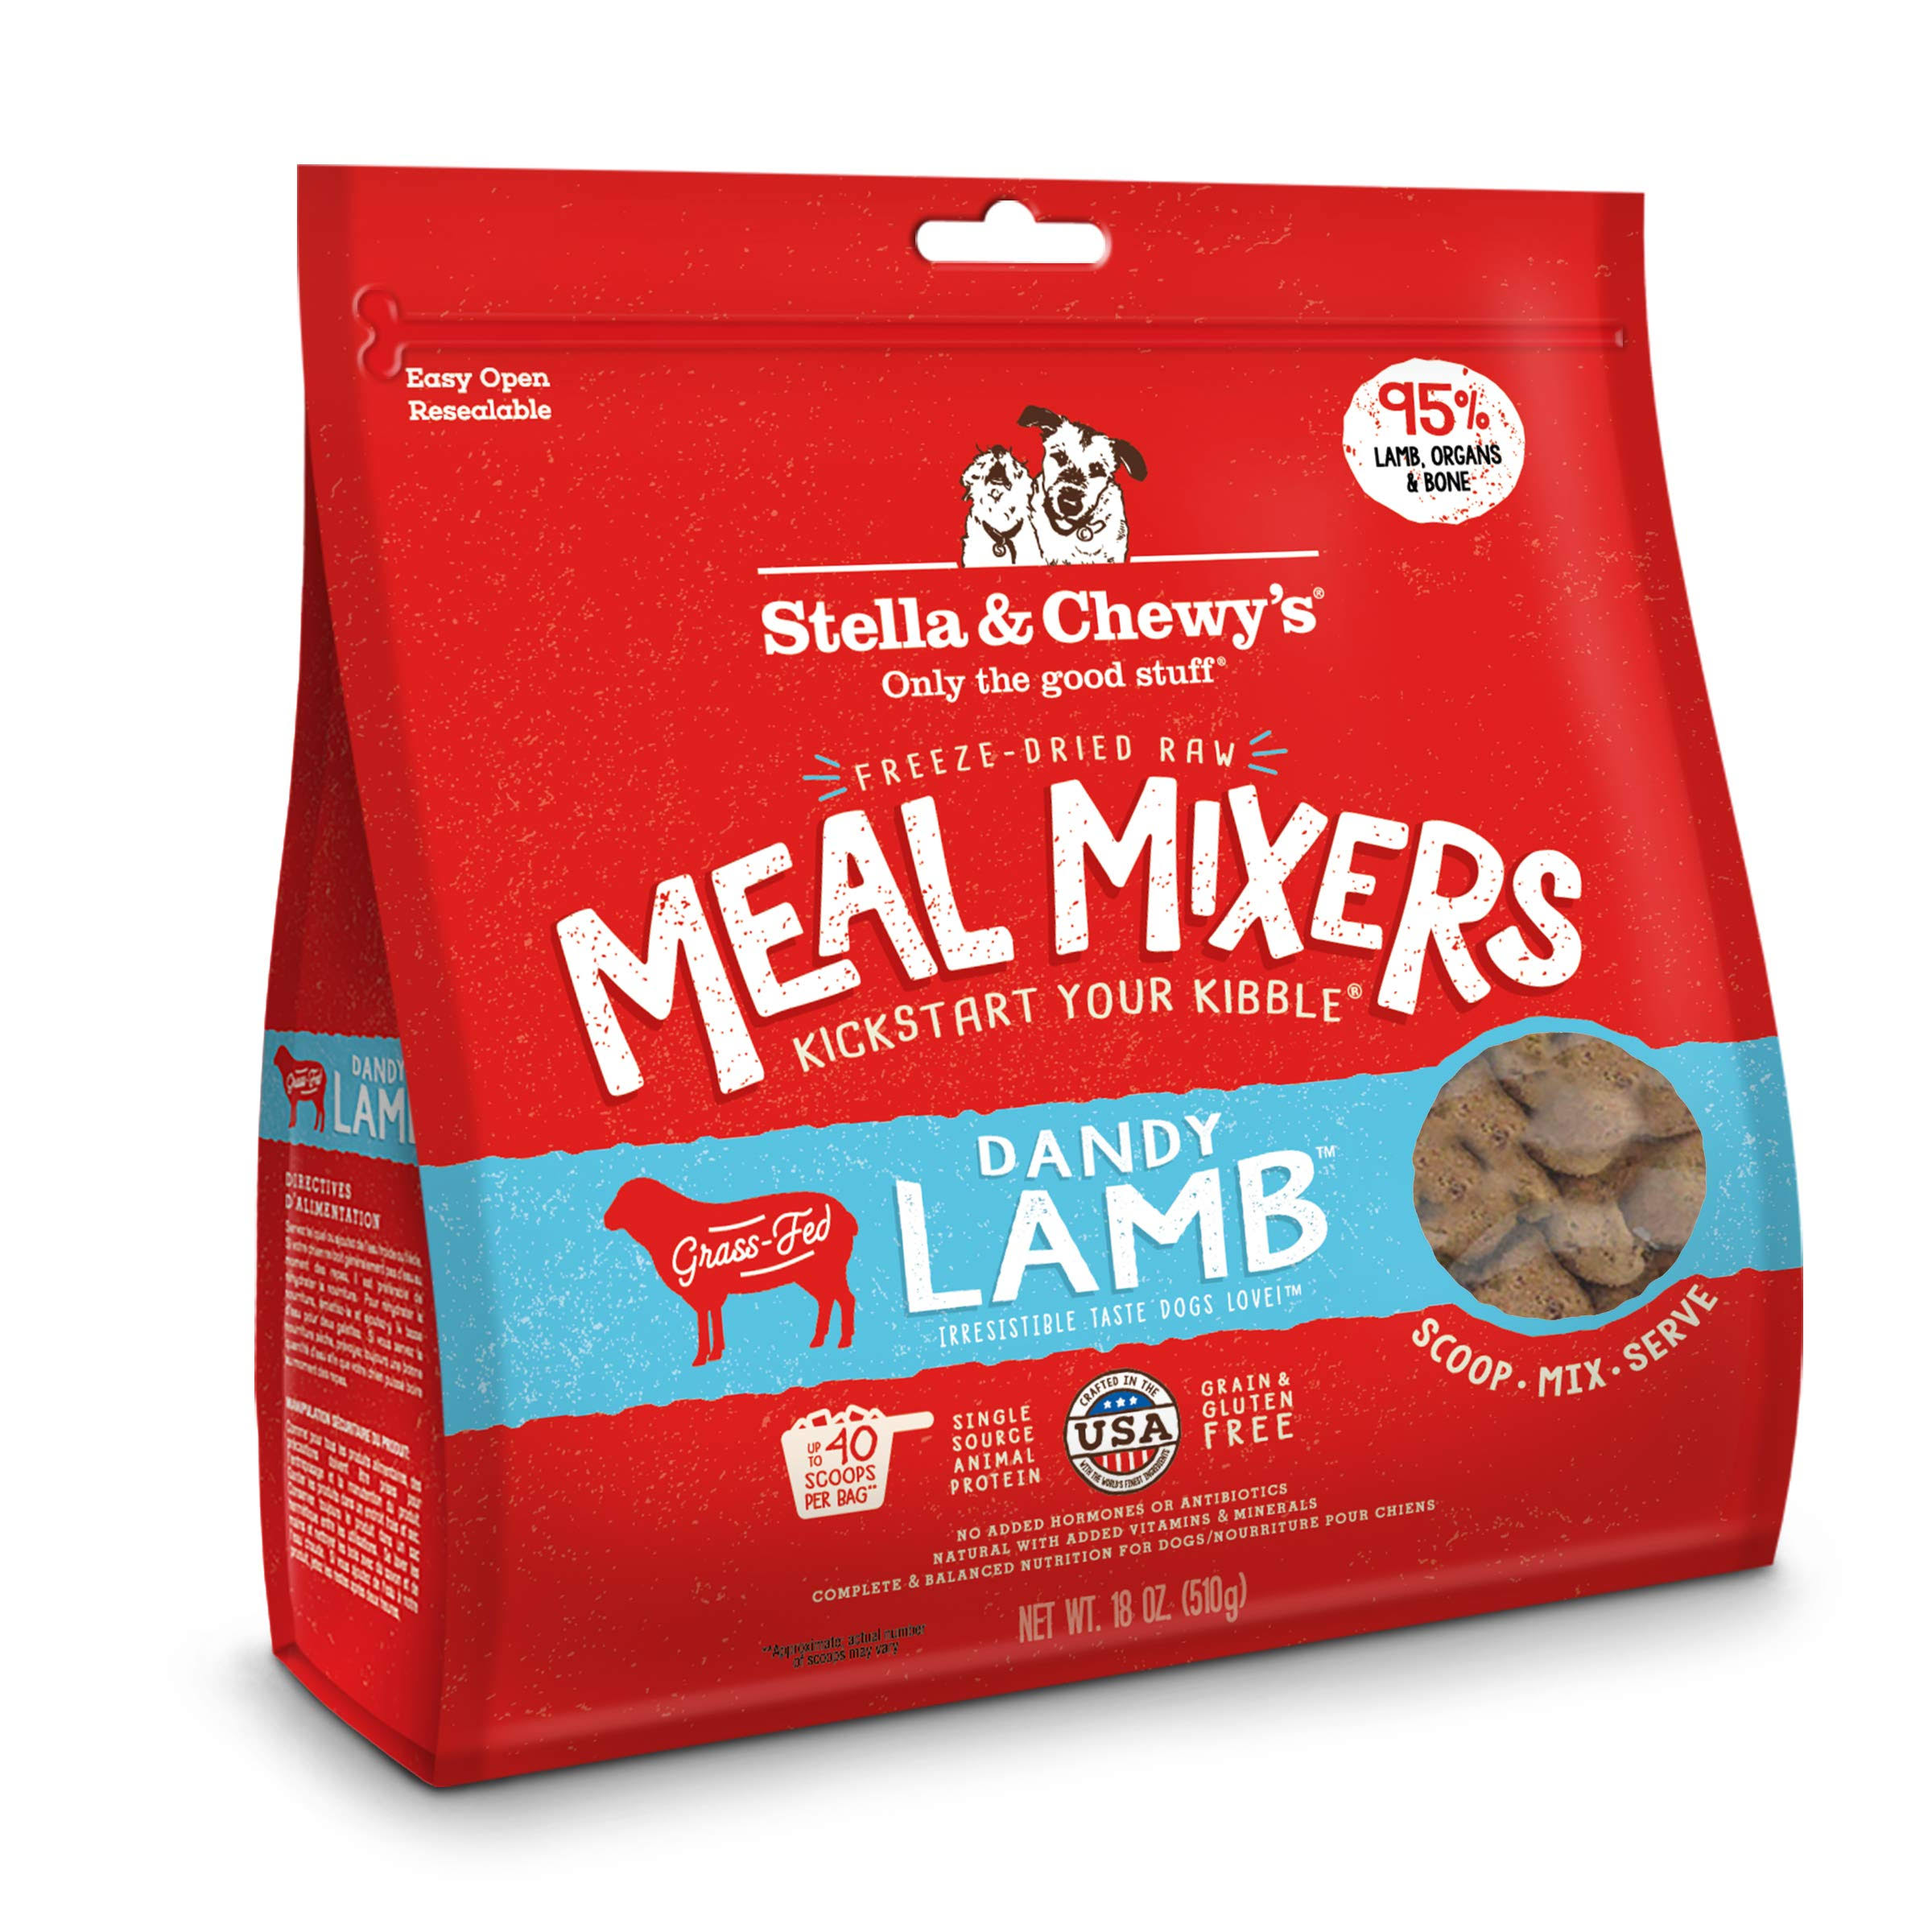 Stella & Chewy's Meal Mixers Dandy Lamb 18Oz